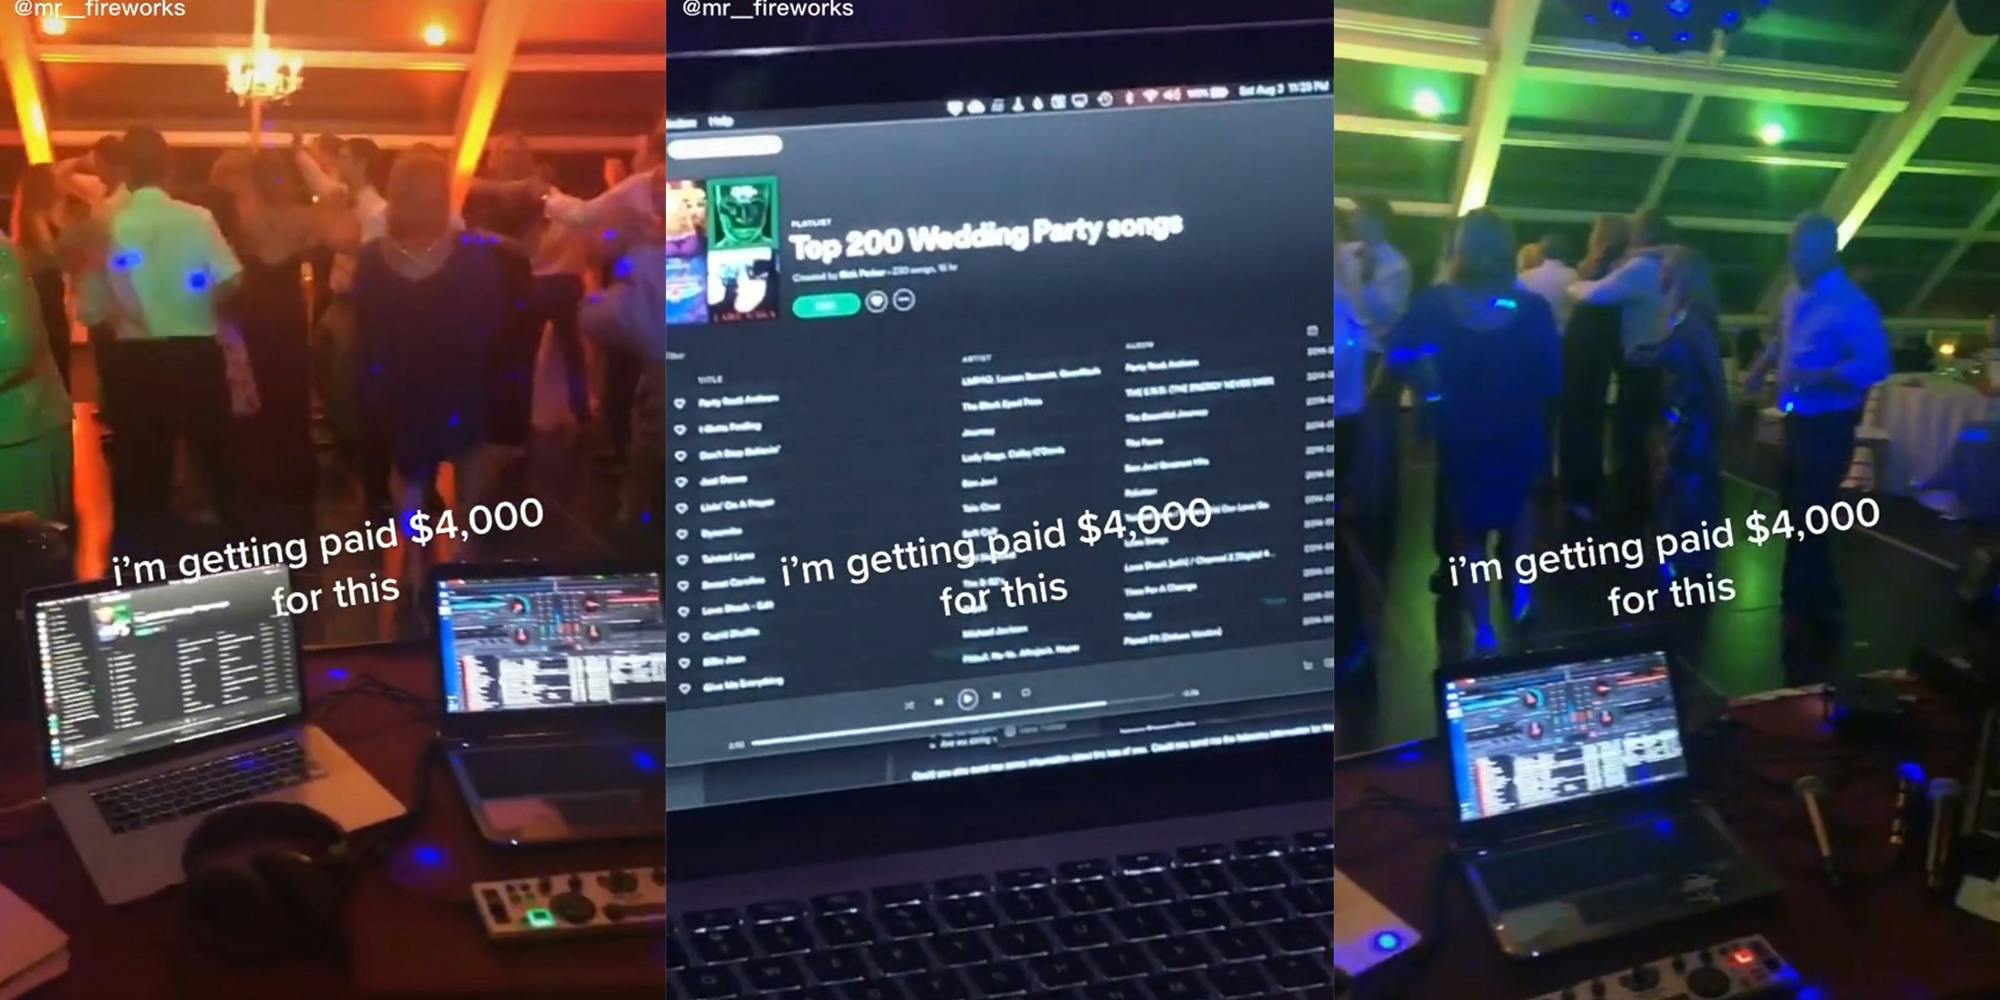 people on dance floor (l&r) spotify Top 200 Wedding Party songs playlist on laptop screen (c) all with caption "i'm getting paid $4,000 for this"